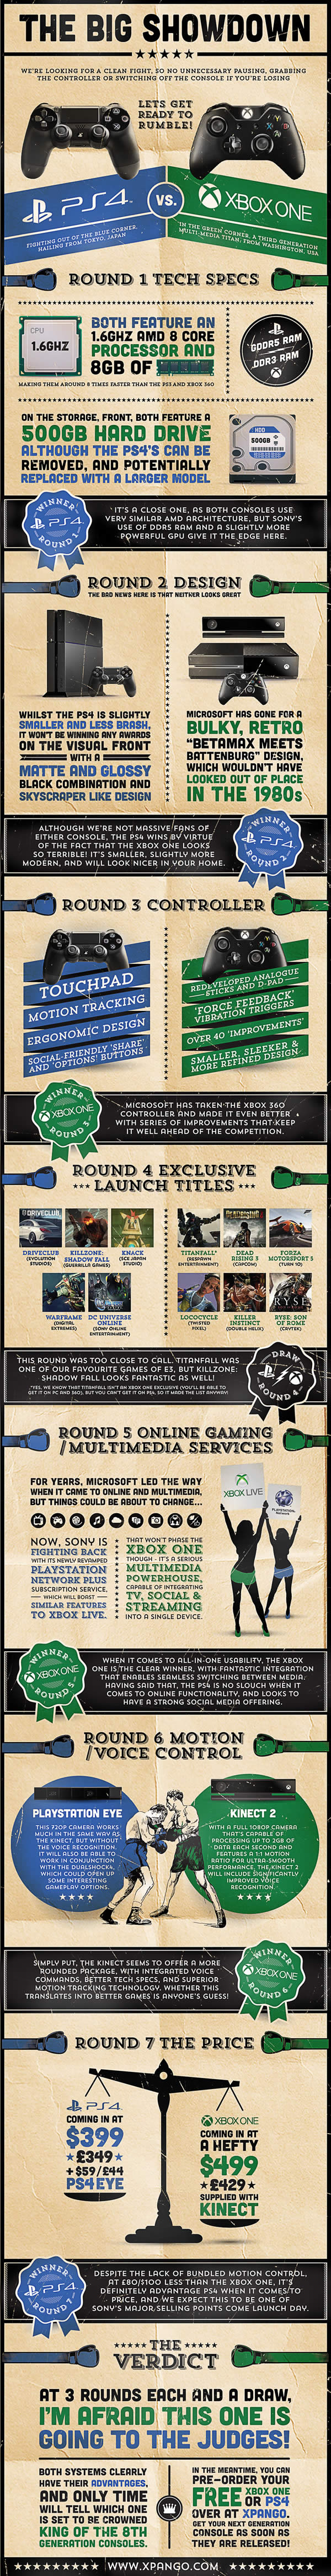 Geek insider, geekinsider, geekinsider. Com,, the showdown ps4 vs xbox one (infographic), gaming